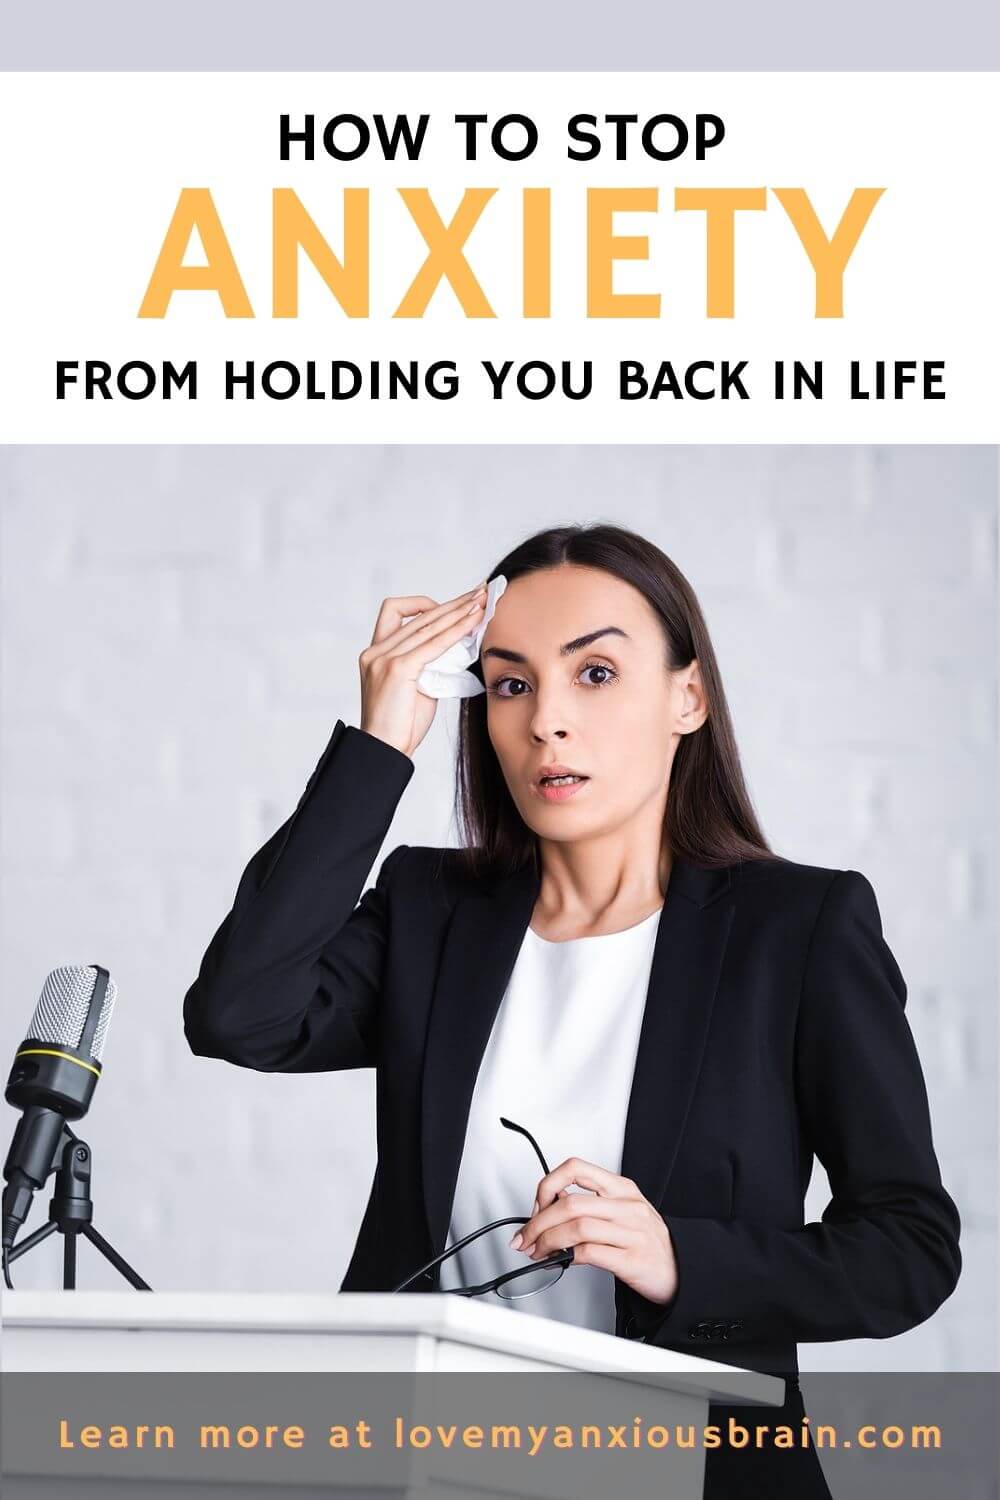 How To Stop Anxiety From Holding You Back